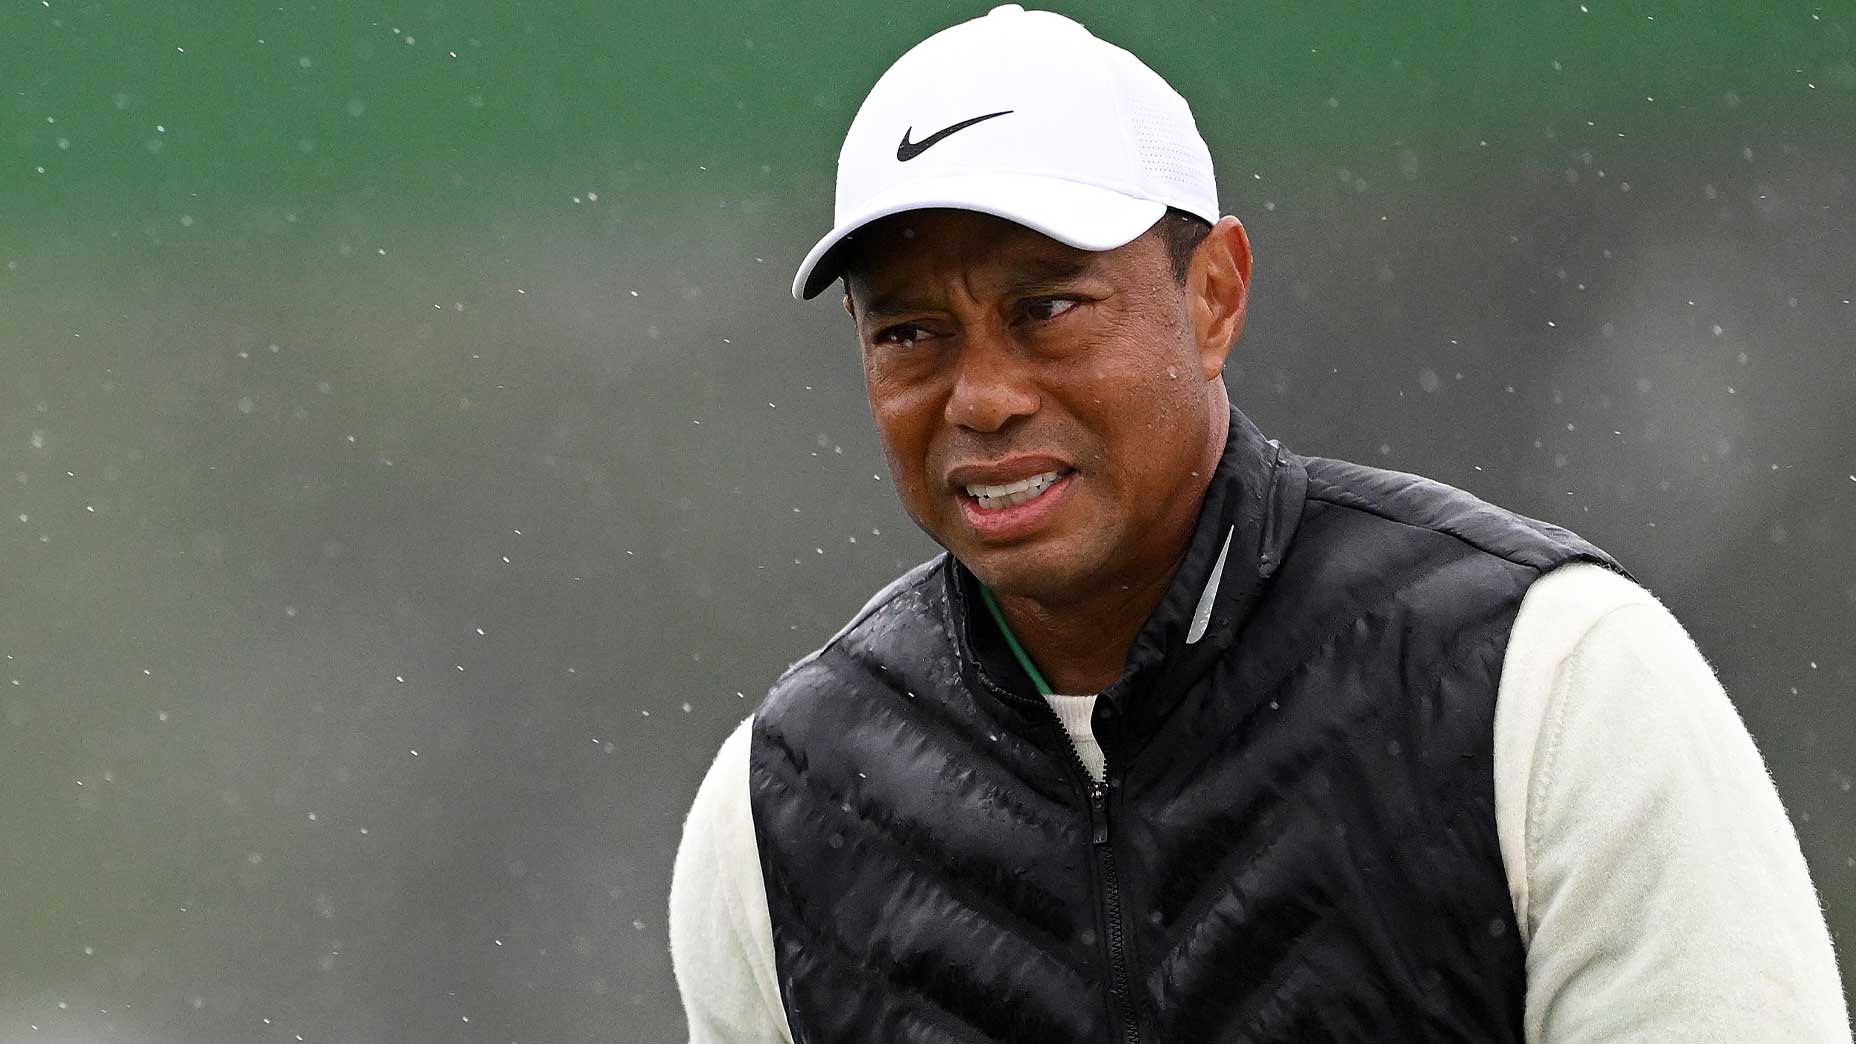 Tiger Woods walks in the rain at the Masters tournament in a white hat.